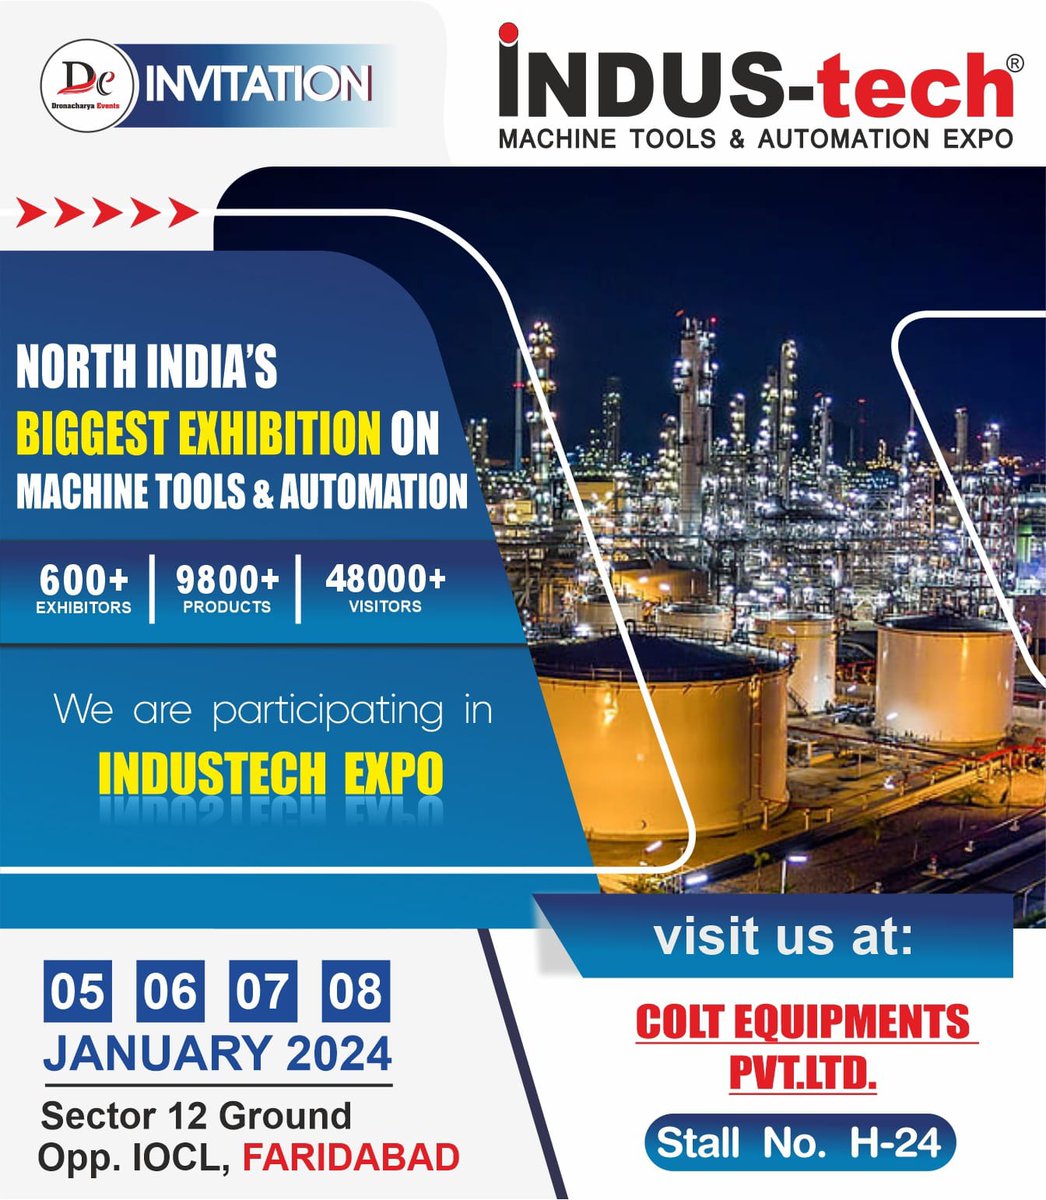 Gear up for INDUS-tech Expo! Colt Equipments Pvt. Ltd. unveils game-changing tech that redefines innovation. Don't miss this glimpse into the future!
.
.
#IndusTechExpo2024 #ColtInnovation #FutureTechReveal #GameChangerTech #InnovationUnveiled #TechShowcase #ColtEquipments